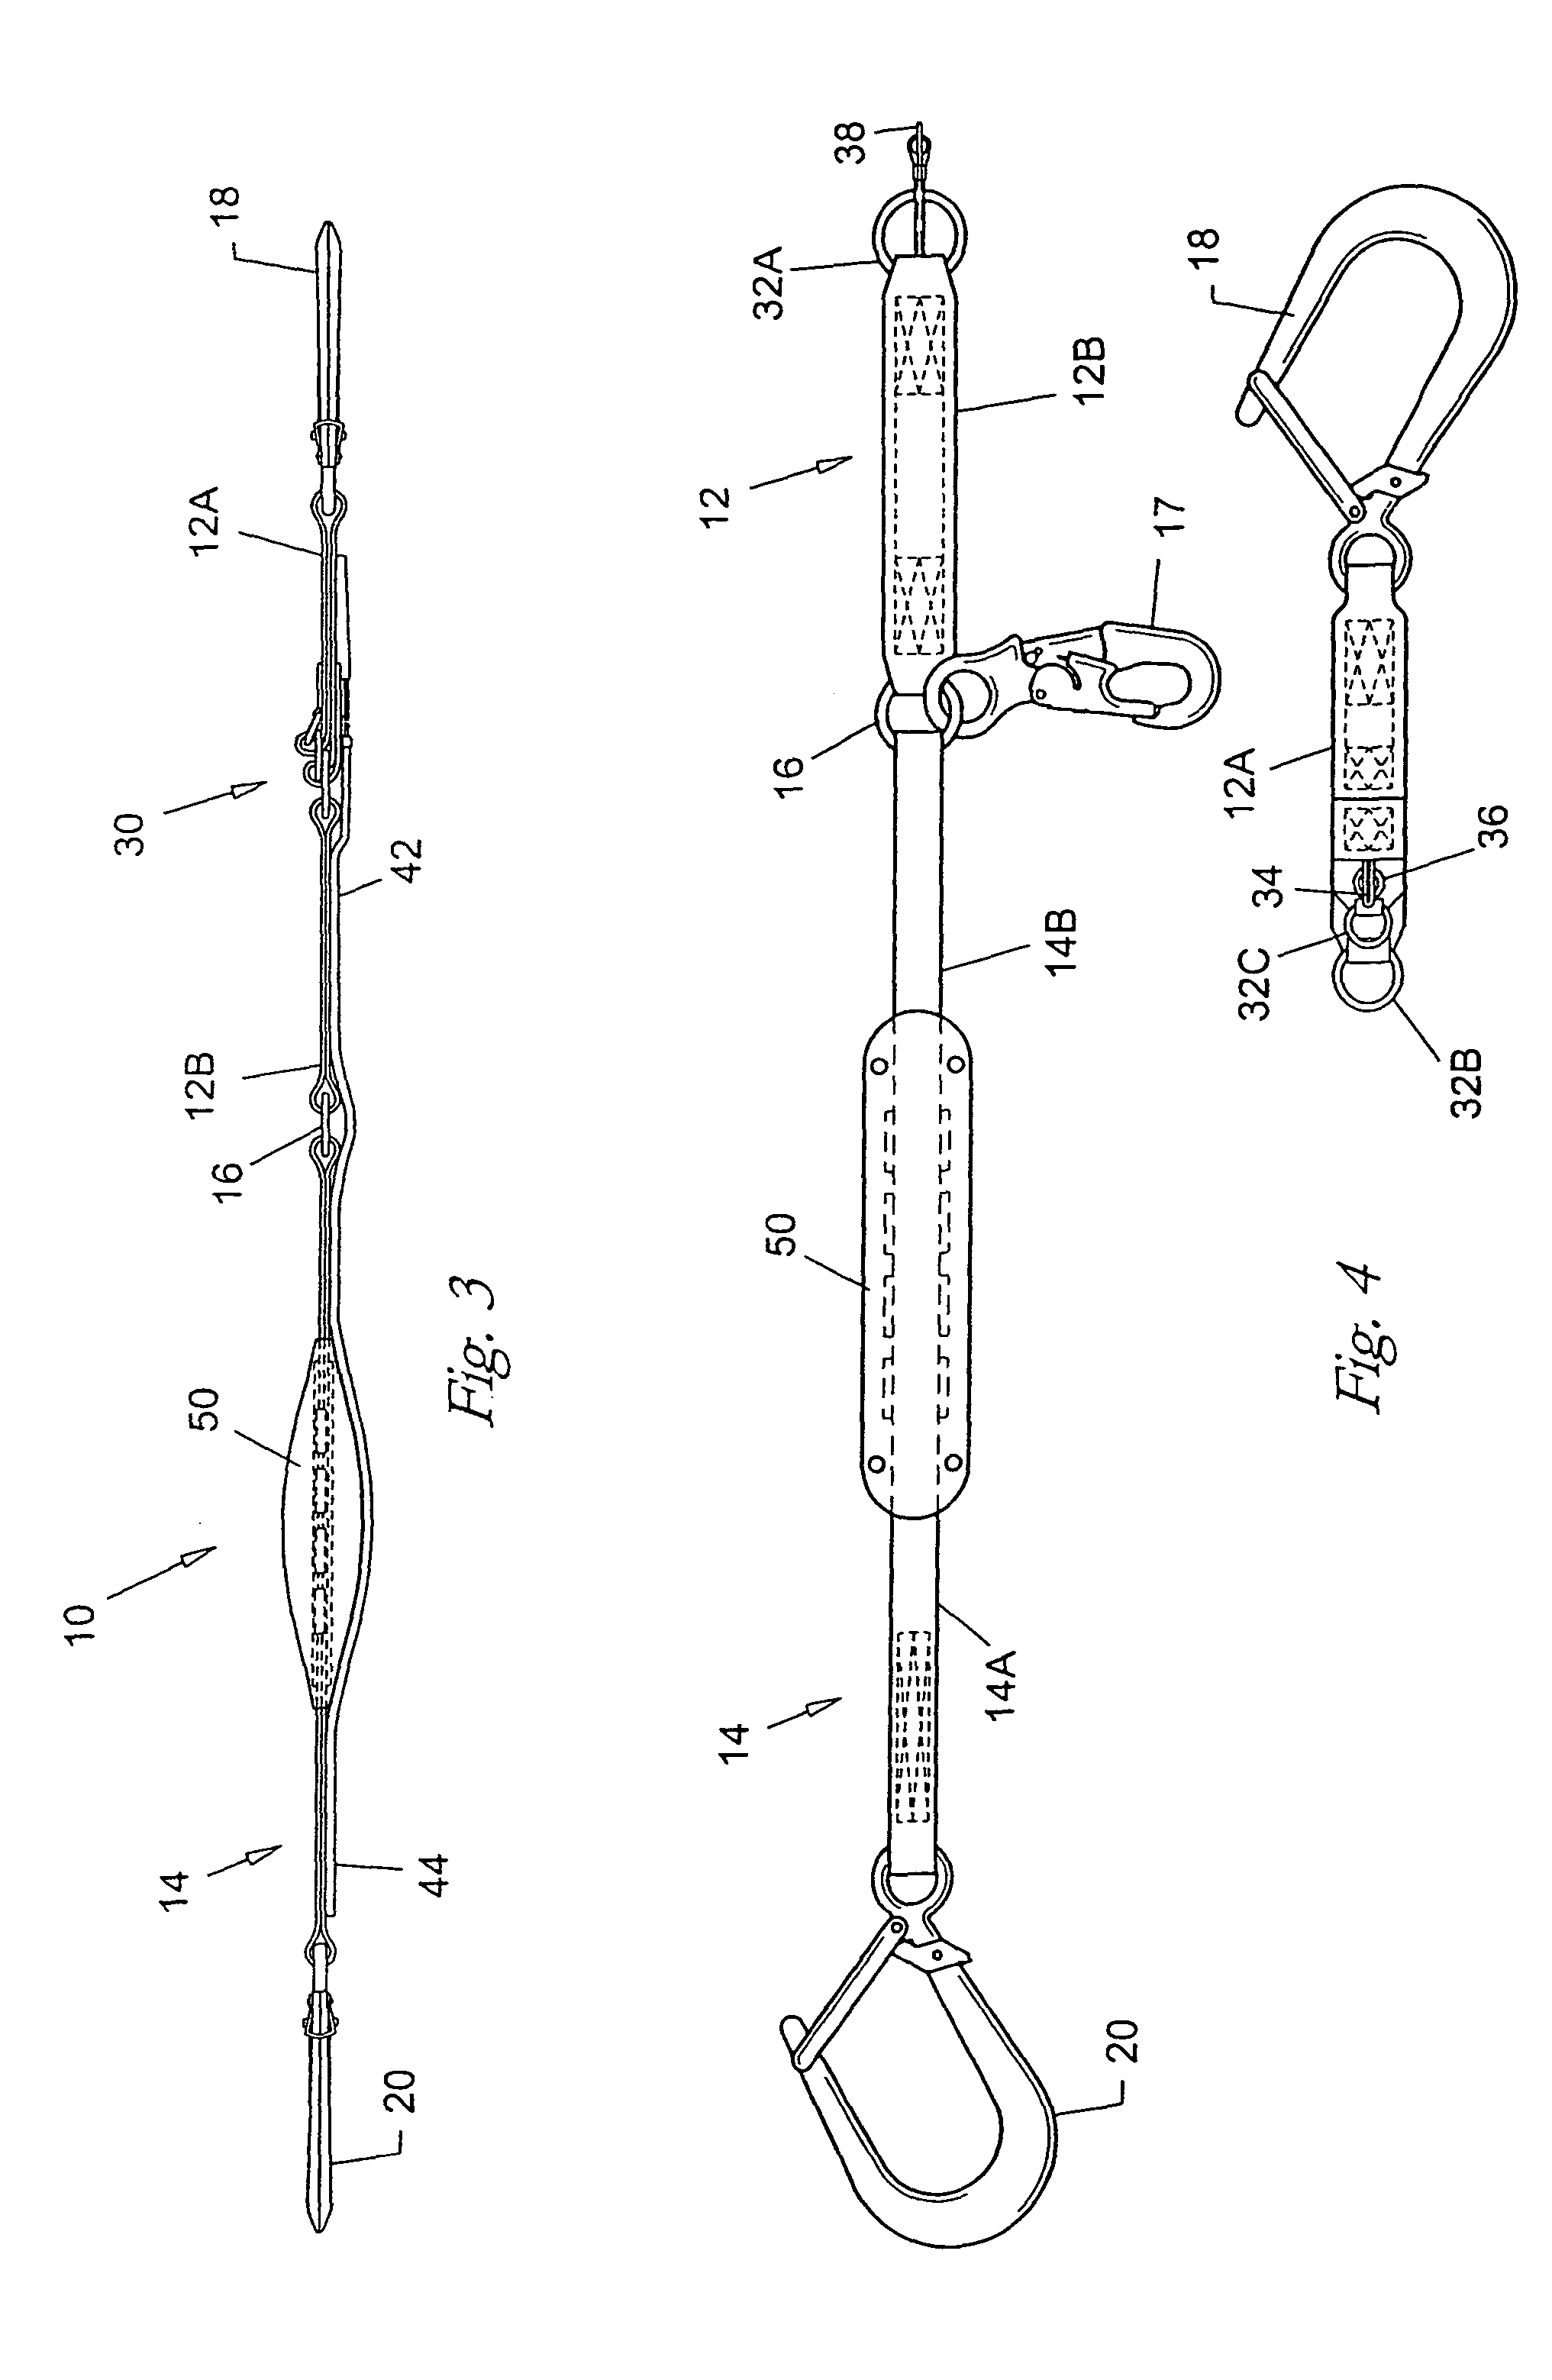 Method for providing fall protection for a load in an elevated environment